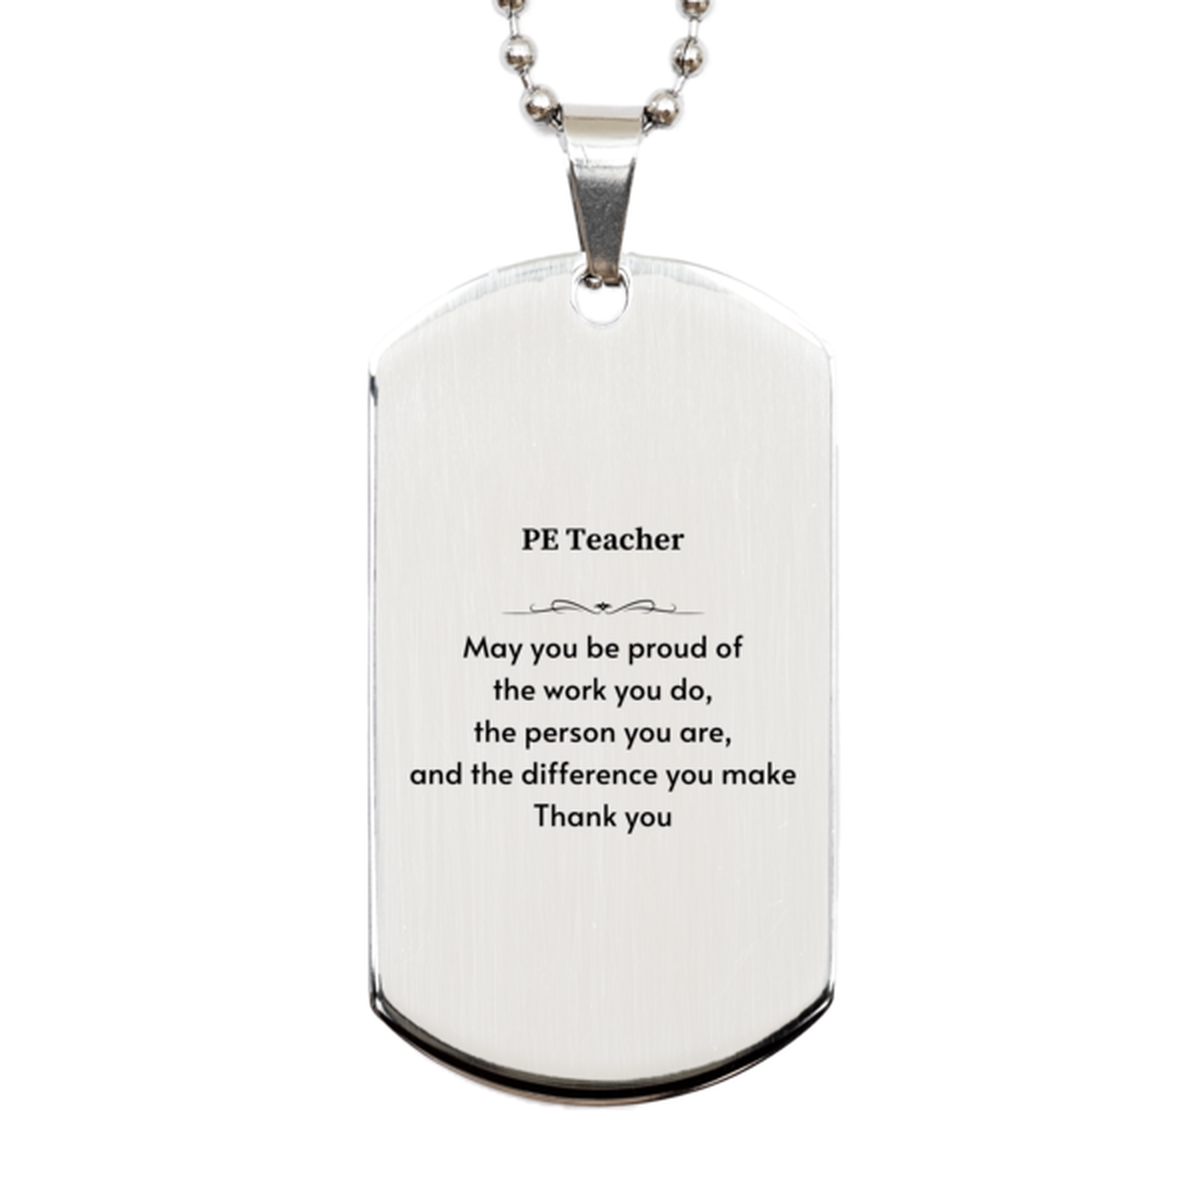 Heartwarming Silver Dog Tag Retirement Coworkers Gifts for PE Teacher, PE Teacher May You be proud of the work you do, the person you are Gifts for Boss Men Women Friends